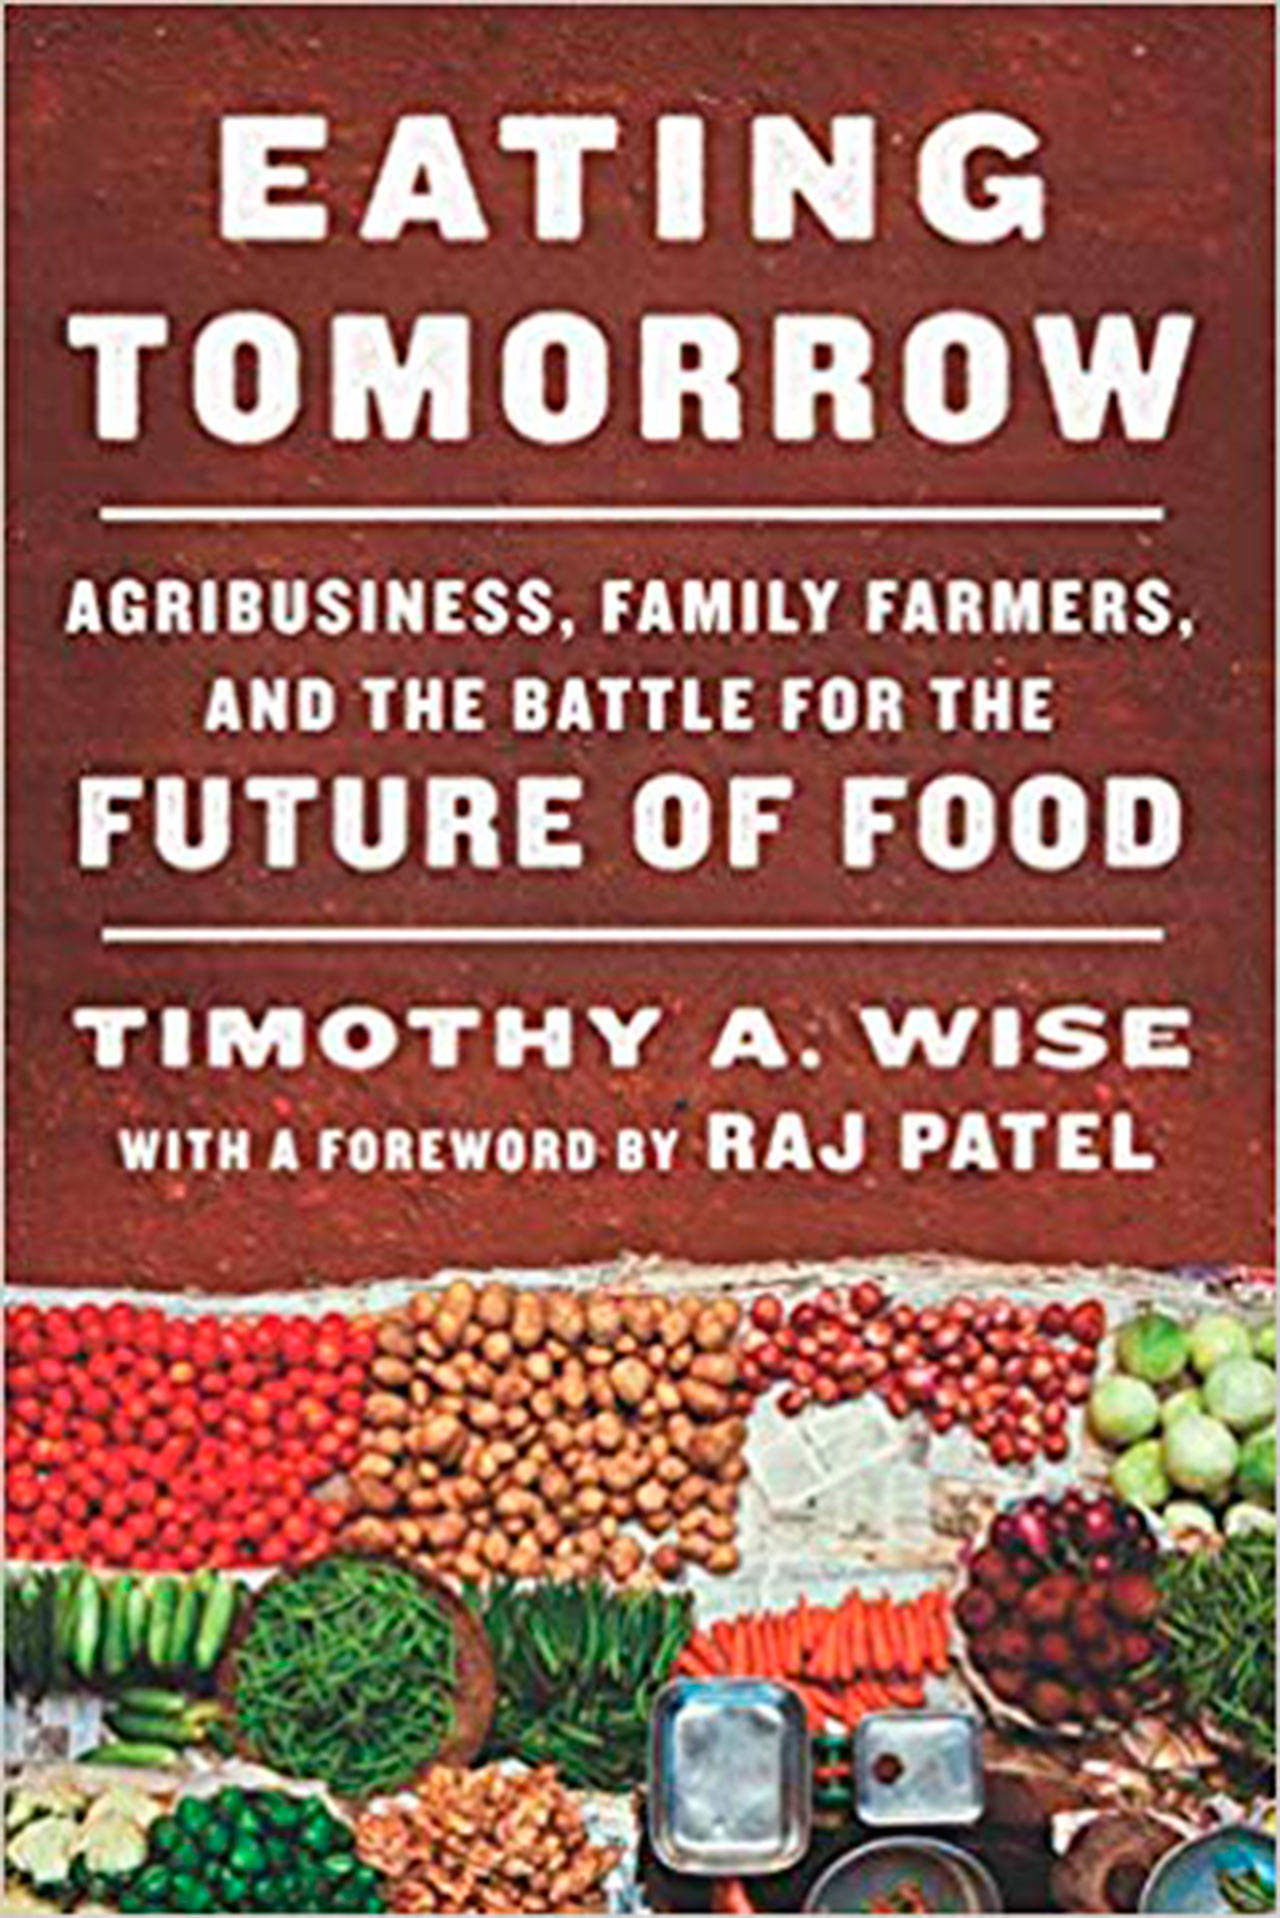 Image courtesy of Eagle Harbor Book Company | Timothy Wise will visit Eagle Harbor Book Company to discuss his new book “Eating Tomorrow: Agribusiness, Family Farmers, and the Battle for the Future of Food” at 4:30 p.m. Sunday, Oct. 27.